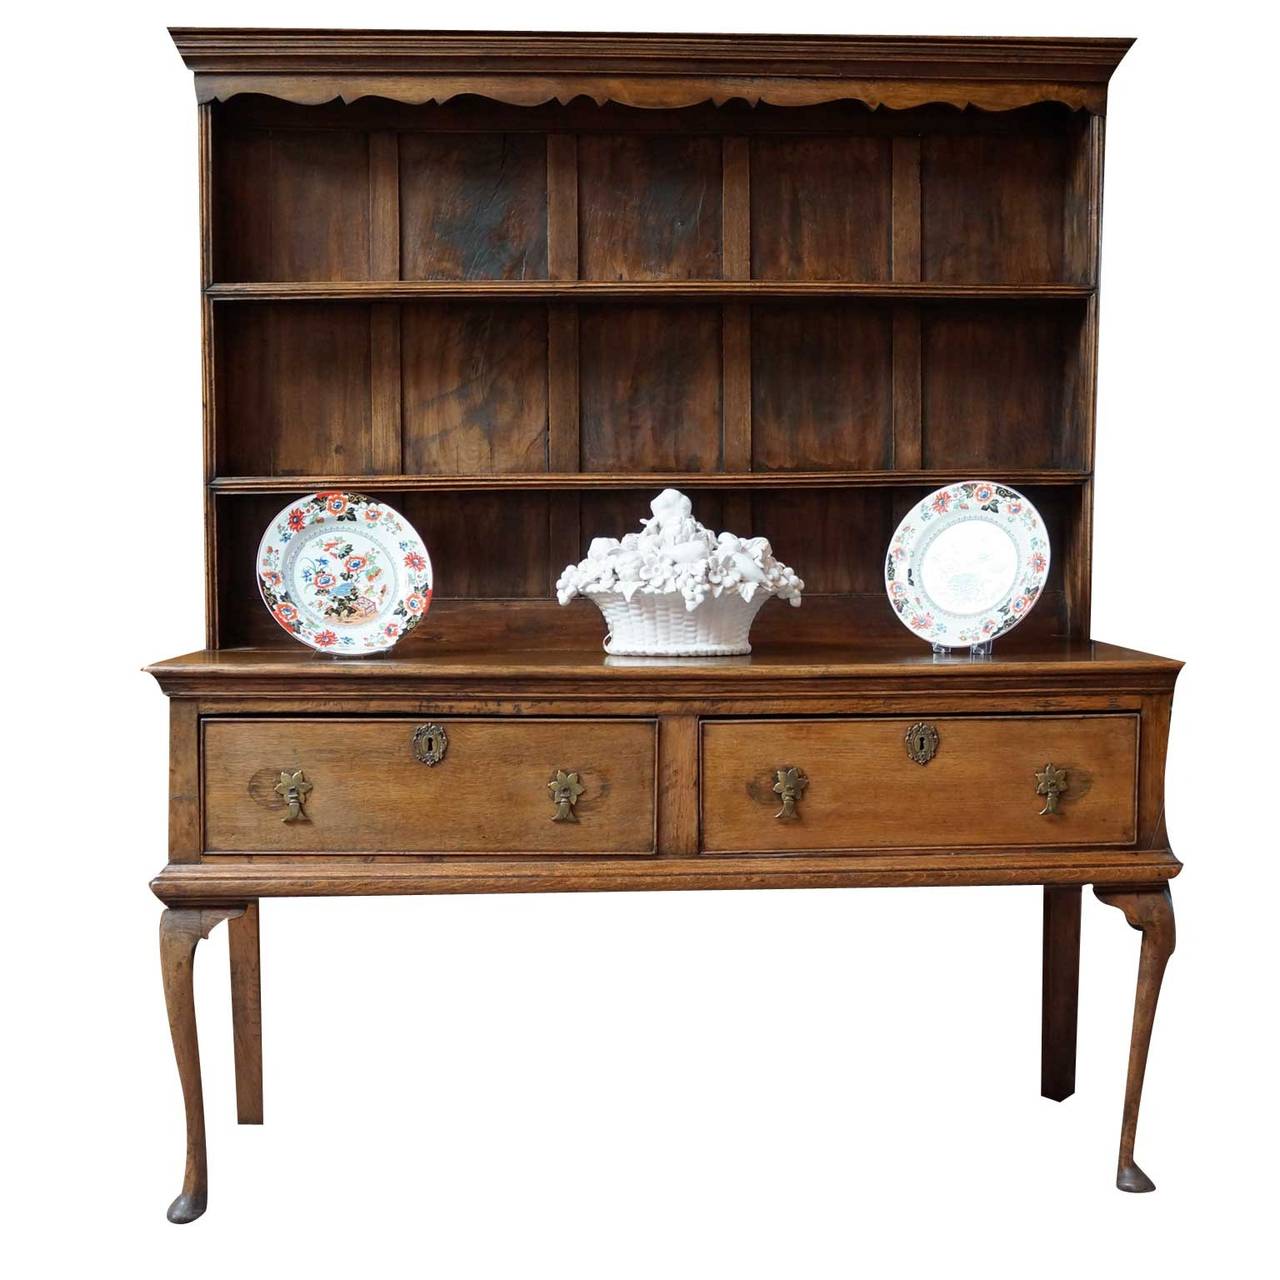 18th Century Welsh Oak Dresser In Excellent Condition For Sale In Carmel, CA